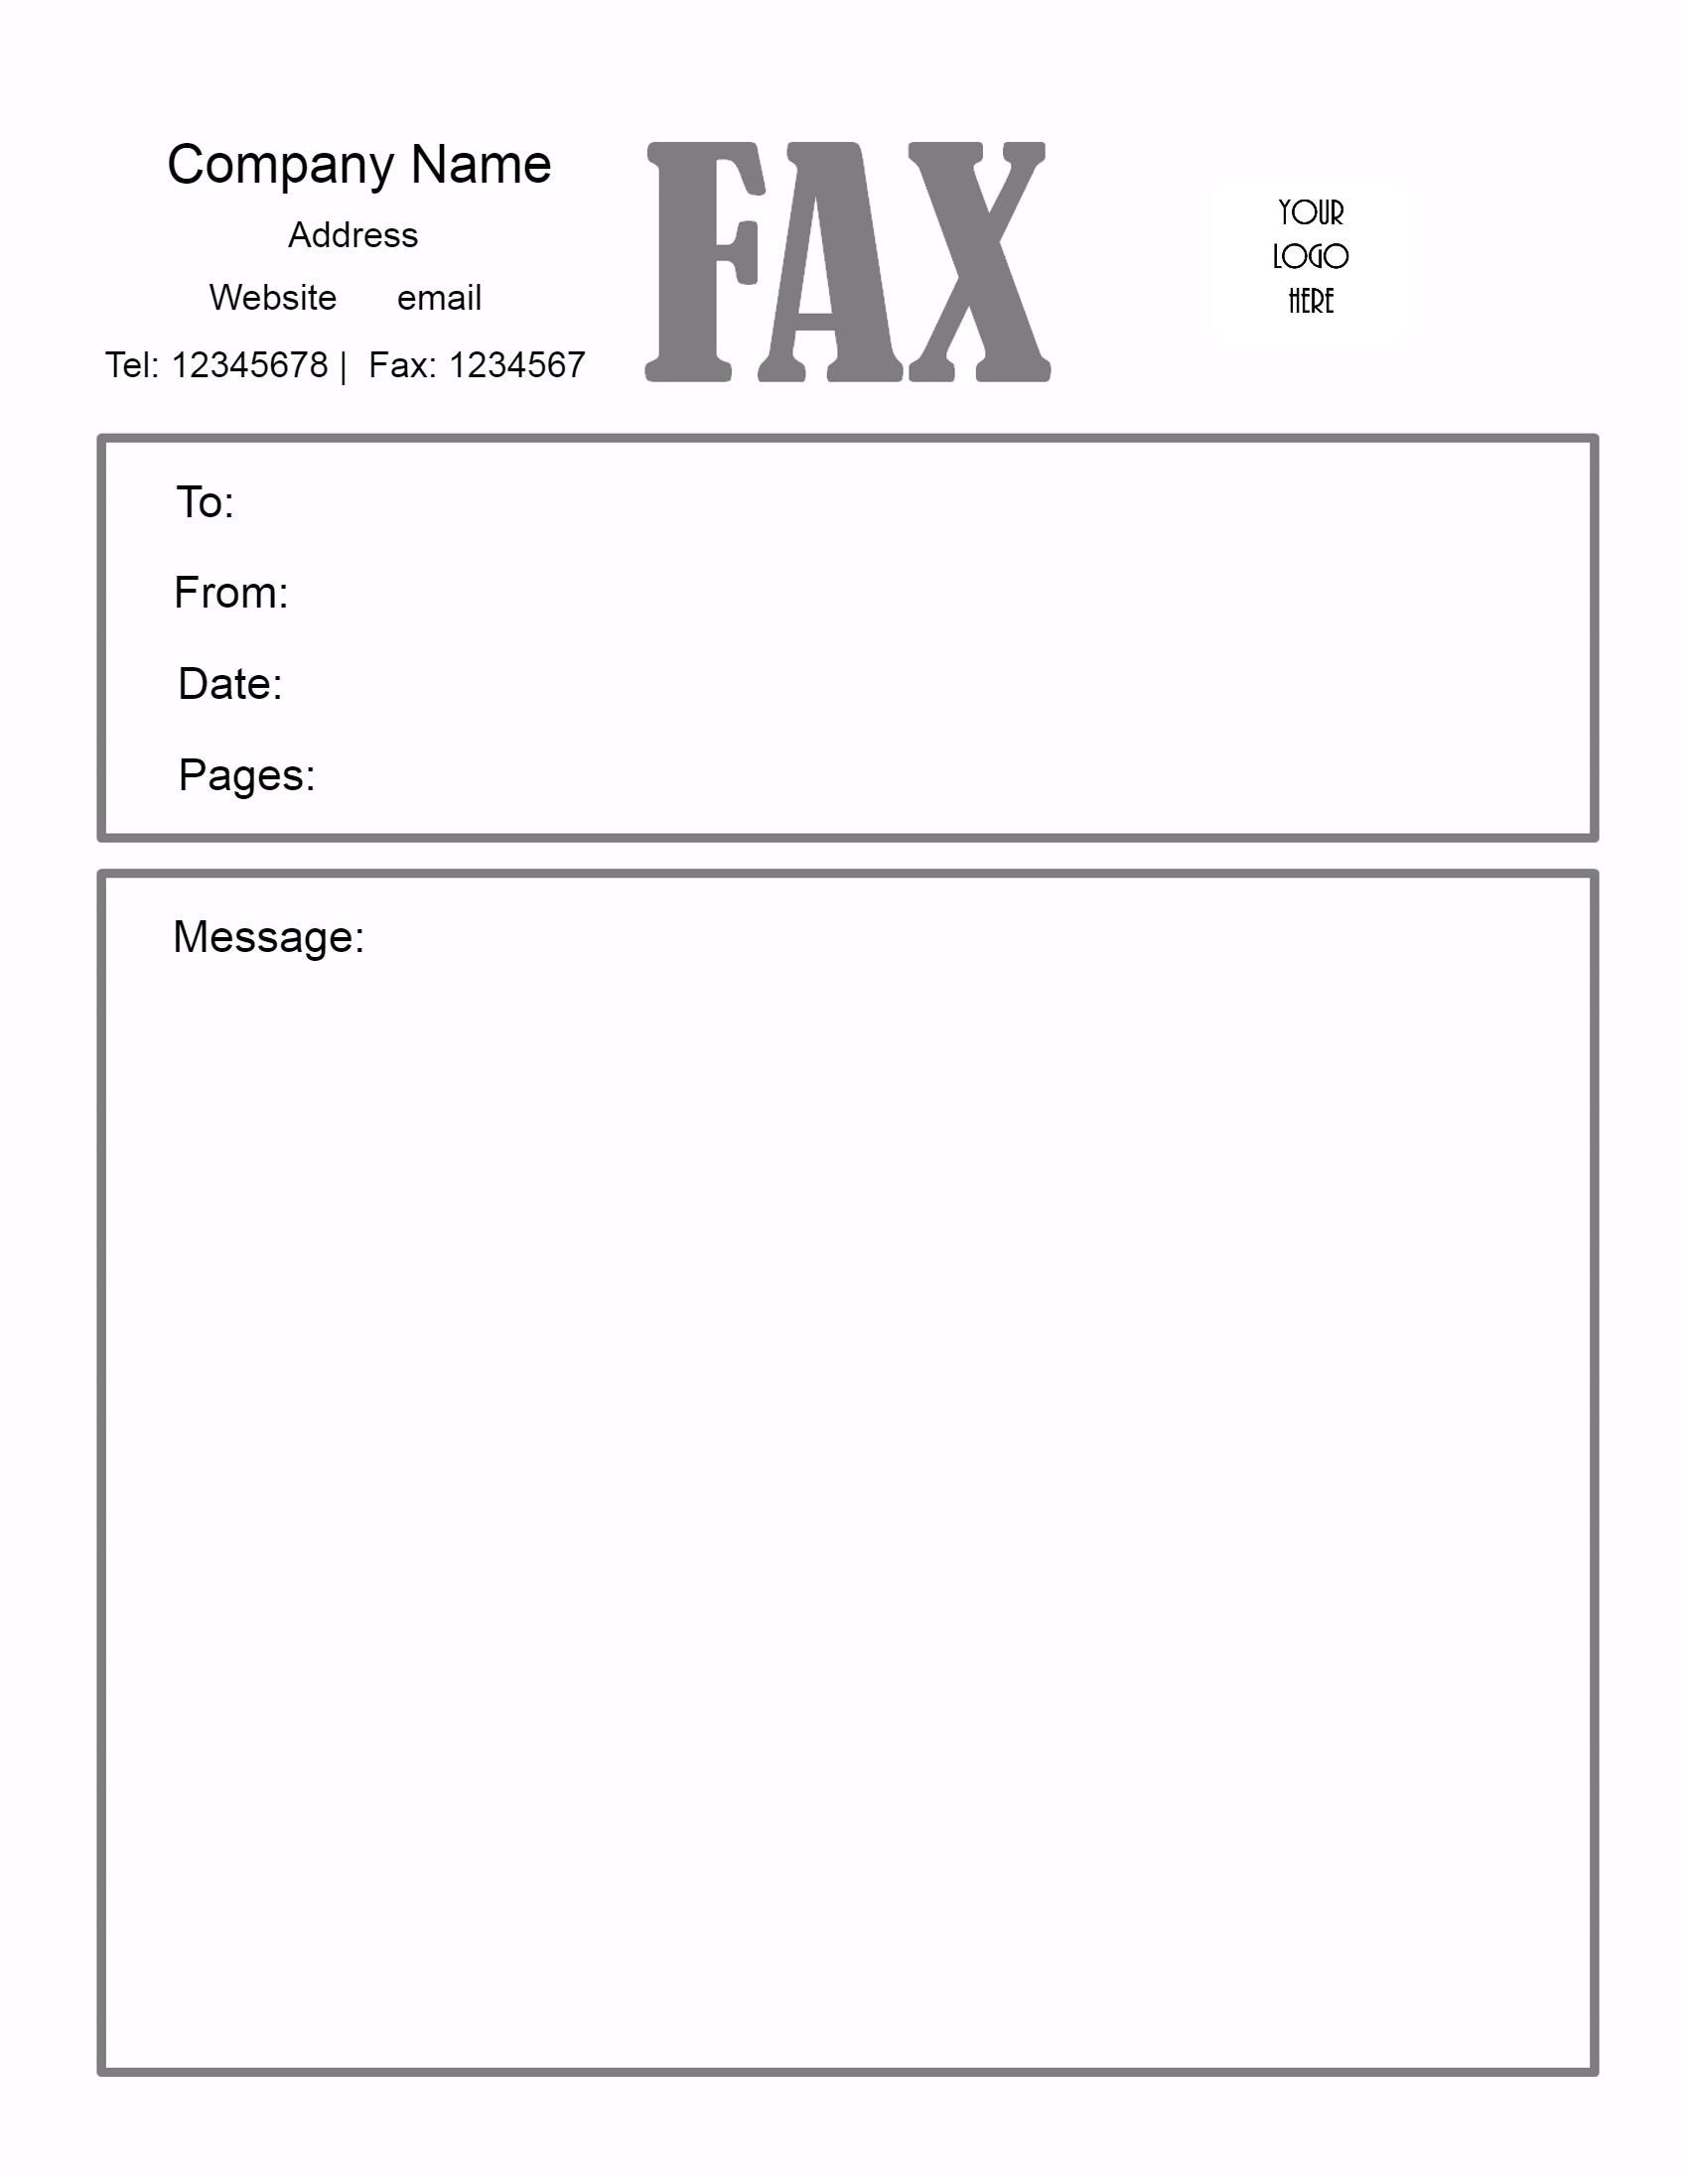 Free Fax Cover Sheet Template Customize Online Then Print Free